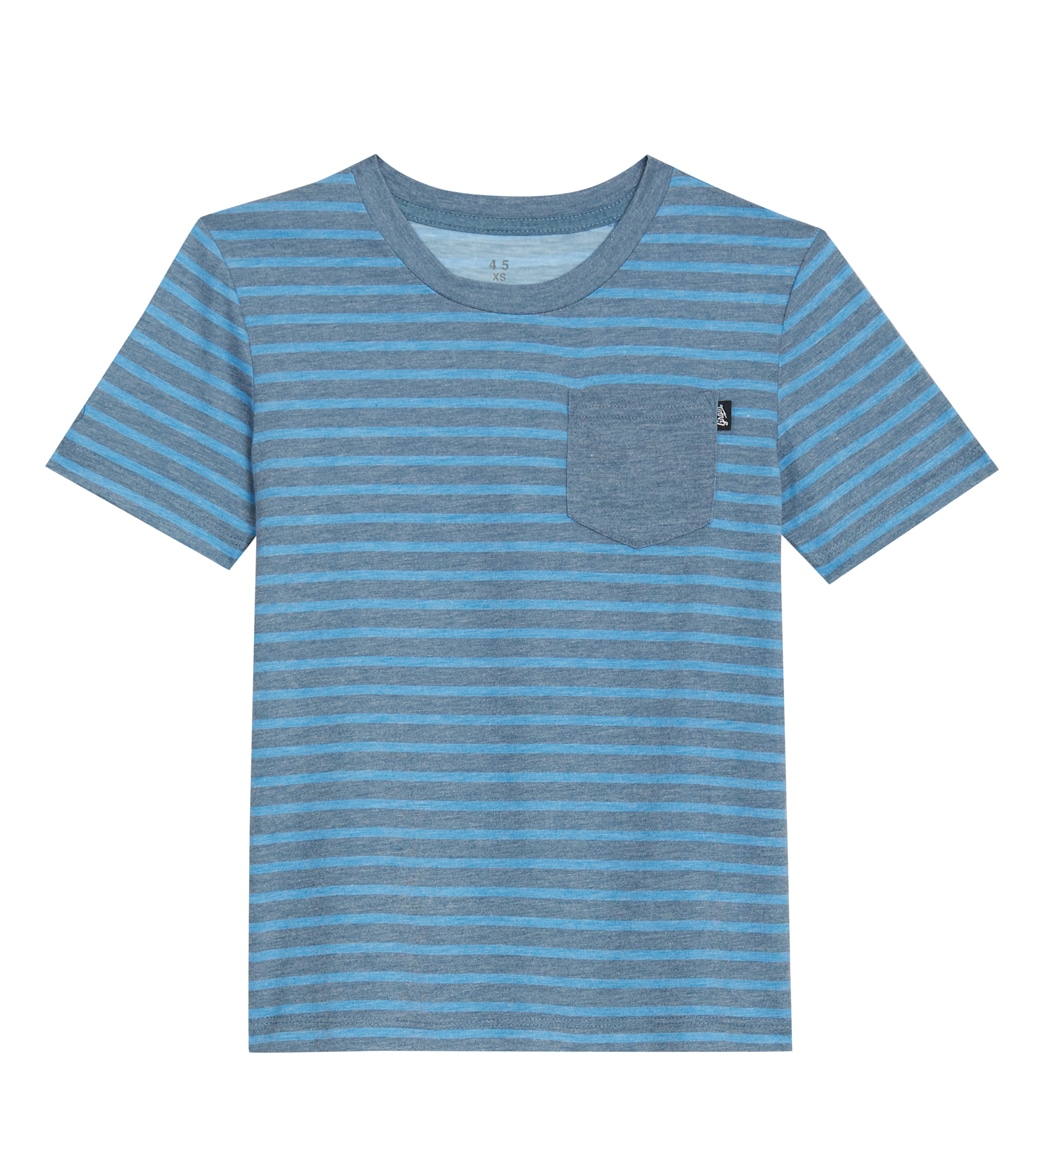 Grom Boys' Pierre Short Sleeve Knit Tee Shirt - Navy Large - Swimoutlet.com